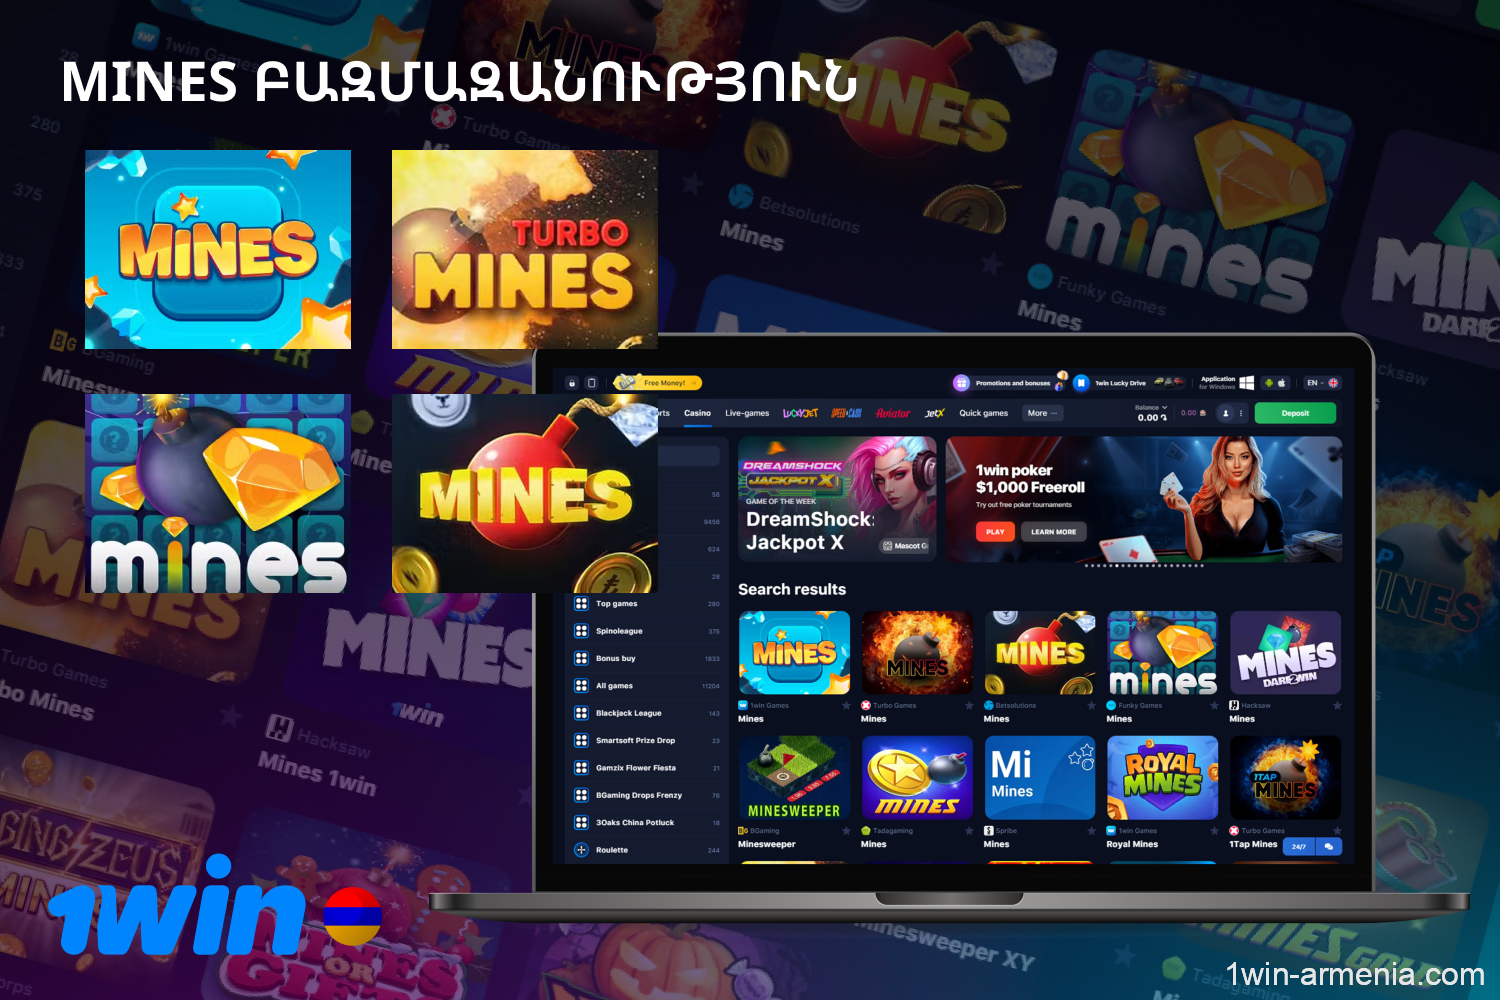 The 1win website and app offers Armenian players a great opportunity to play multiple versions of the Mines game